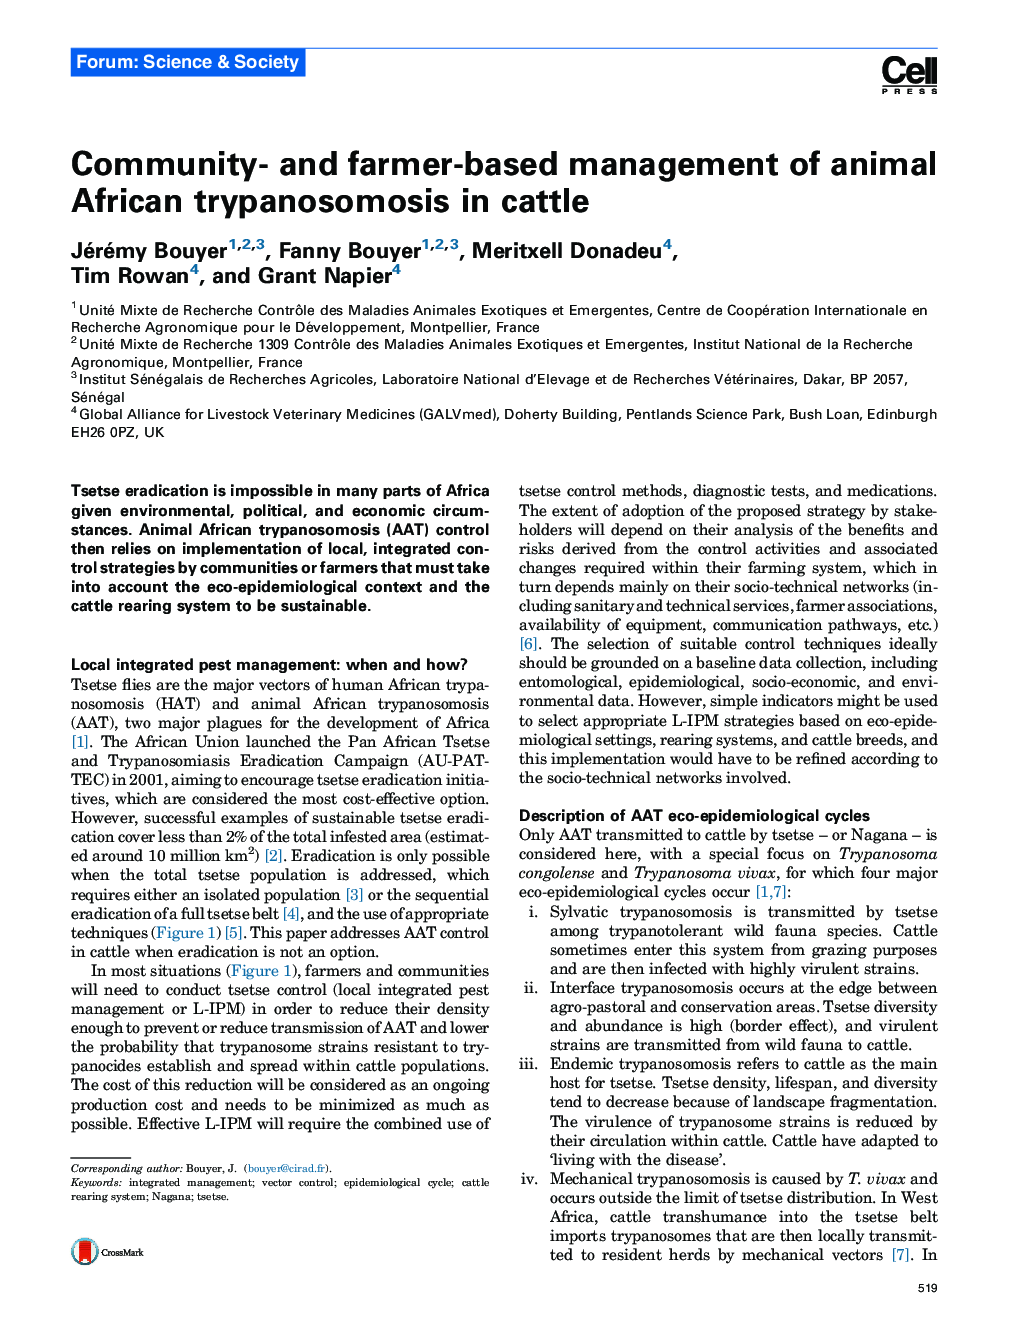 Community- and farmer-based management of animal African trypanosomosis in cattle